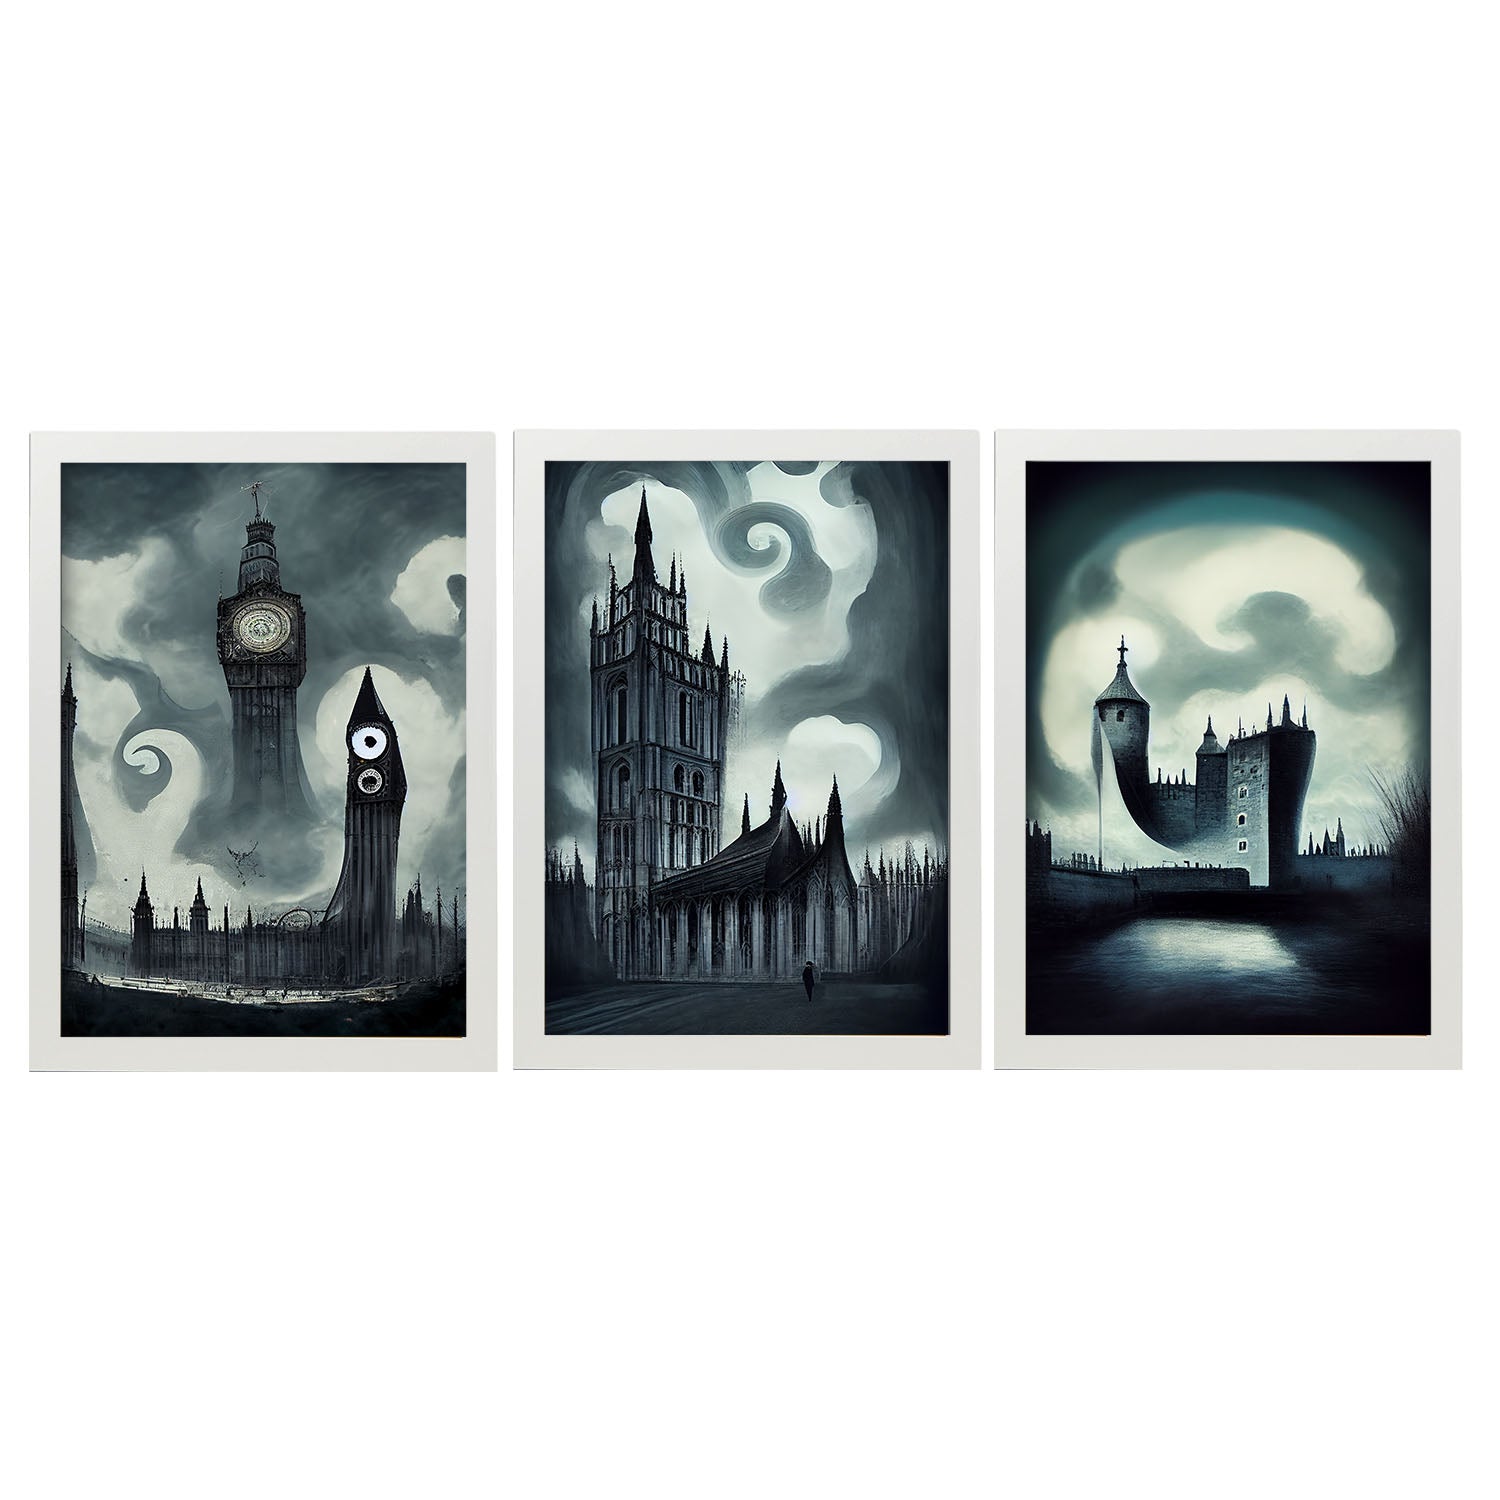 Burton style Illustrations of monuments and cities inspired by Burton's Dark and Goth art Interior Design and Decoration Set Collection 12-Artwork-Nacnic-A4-Marco Blanco-Nacnic Estudio SL